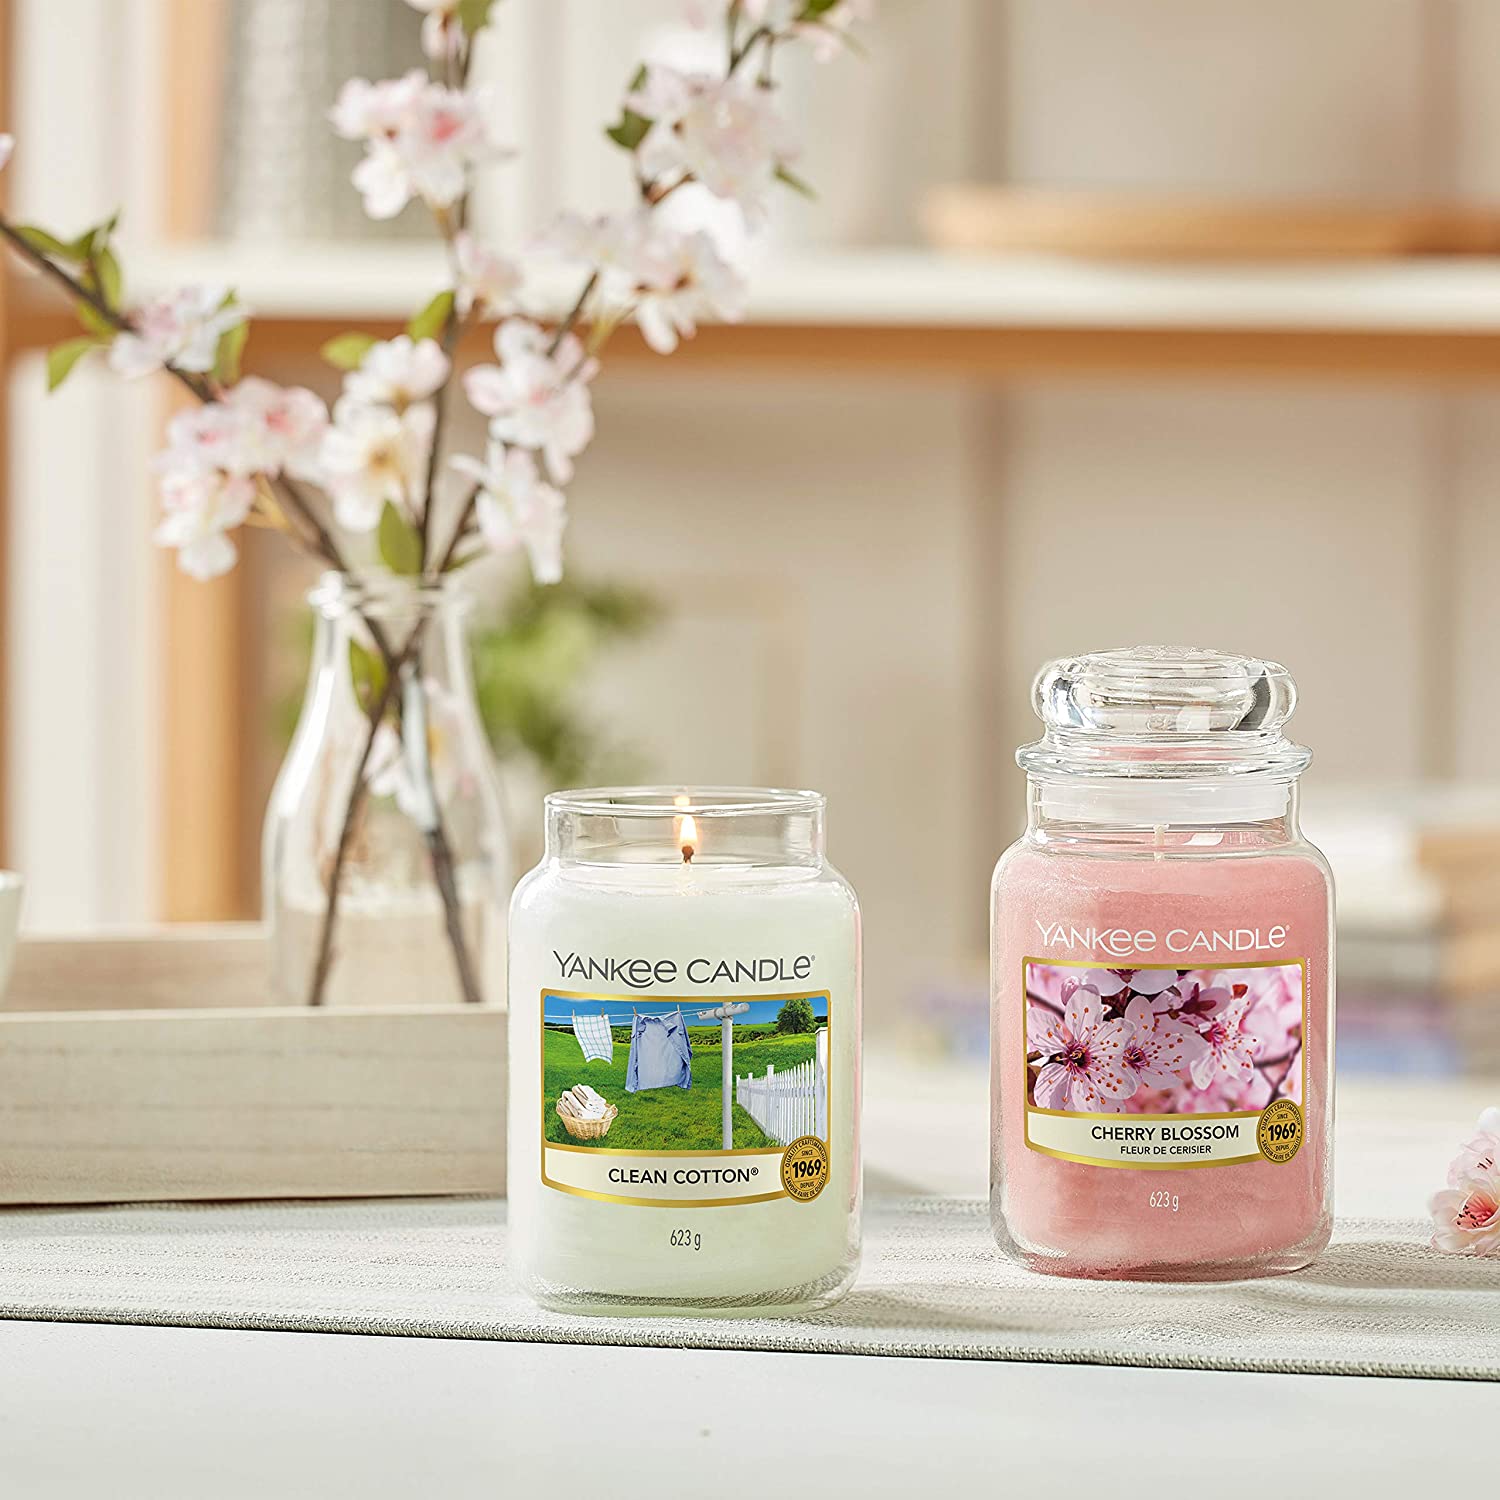 https://www.all-candles-wholesale.co.uk/wp-content/uploads/2020/10/Clean-Cotton-3.jpg